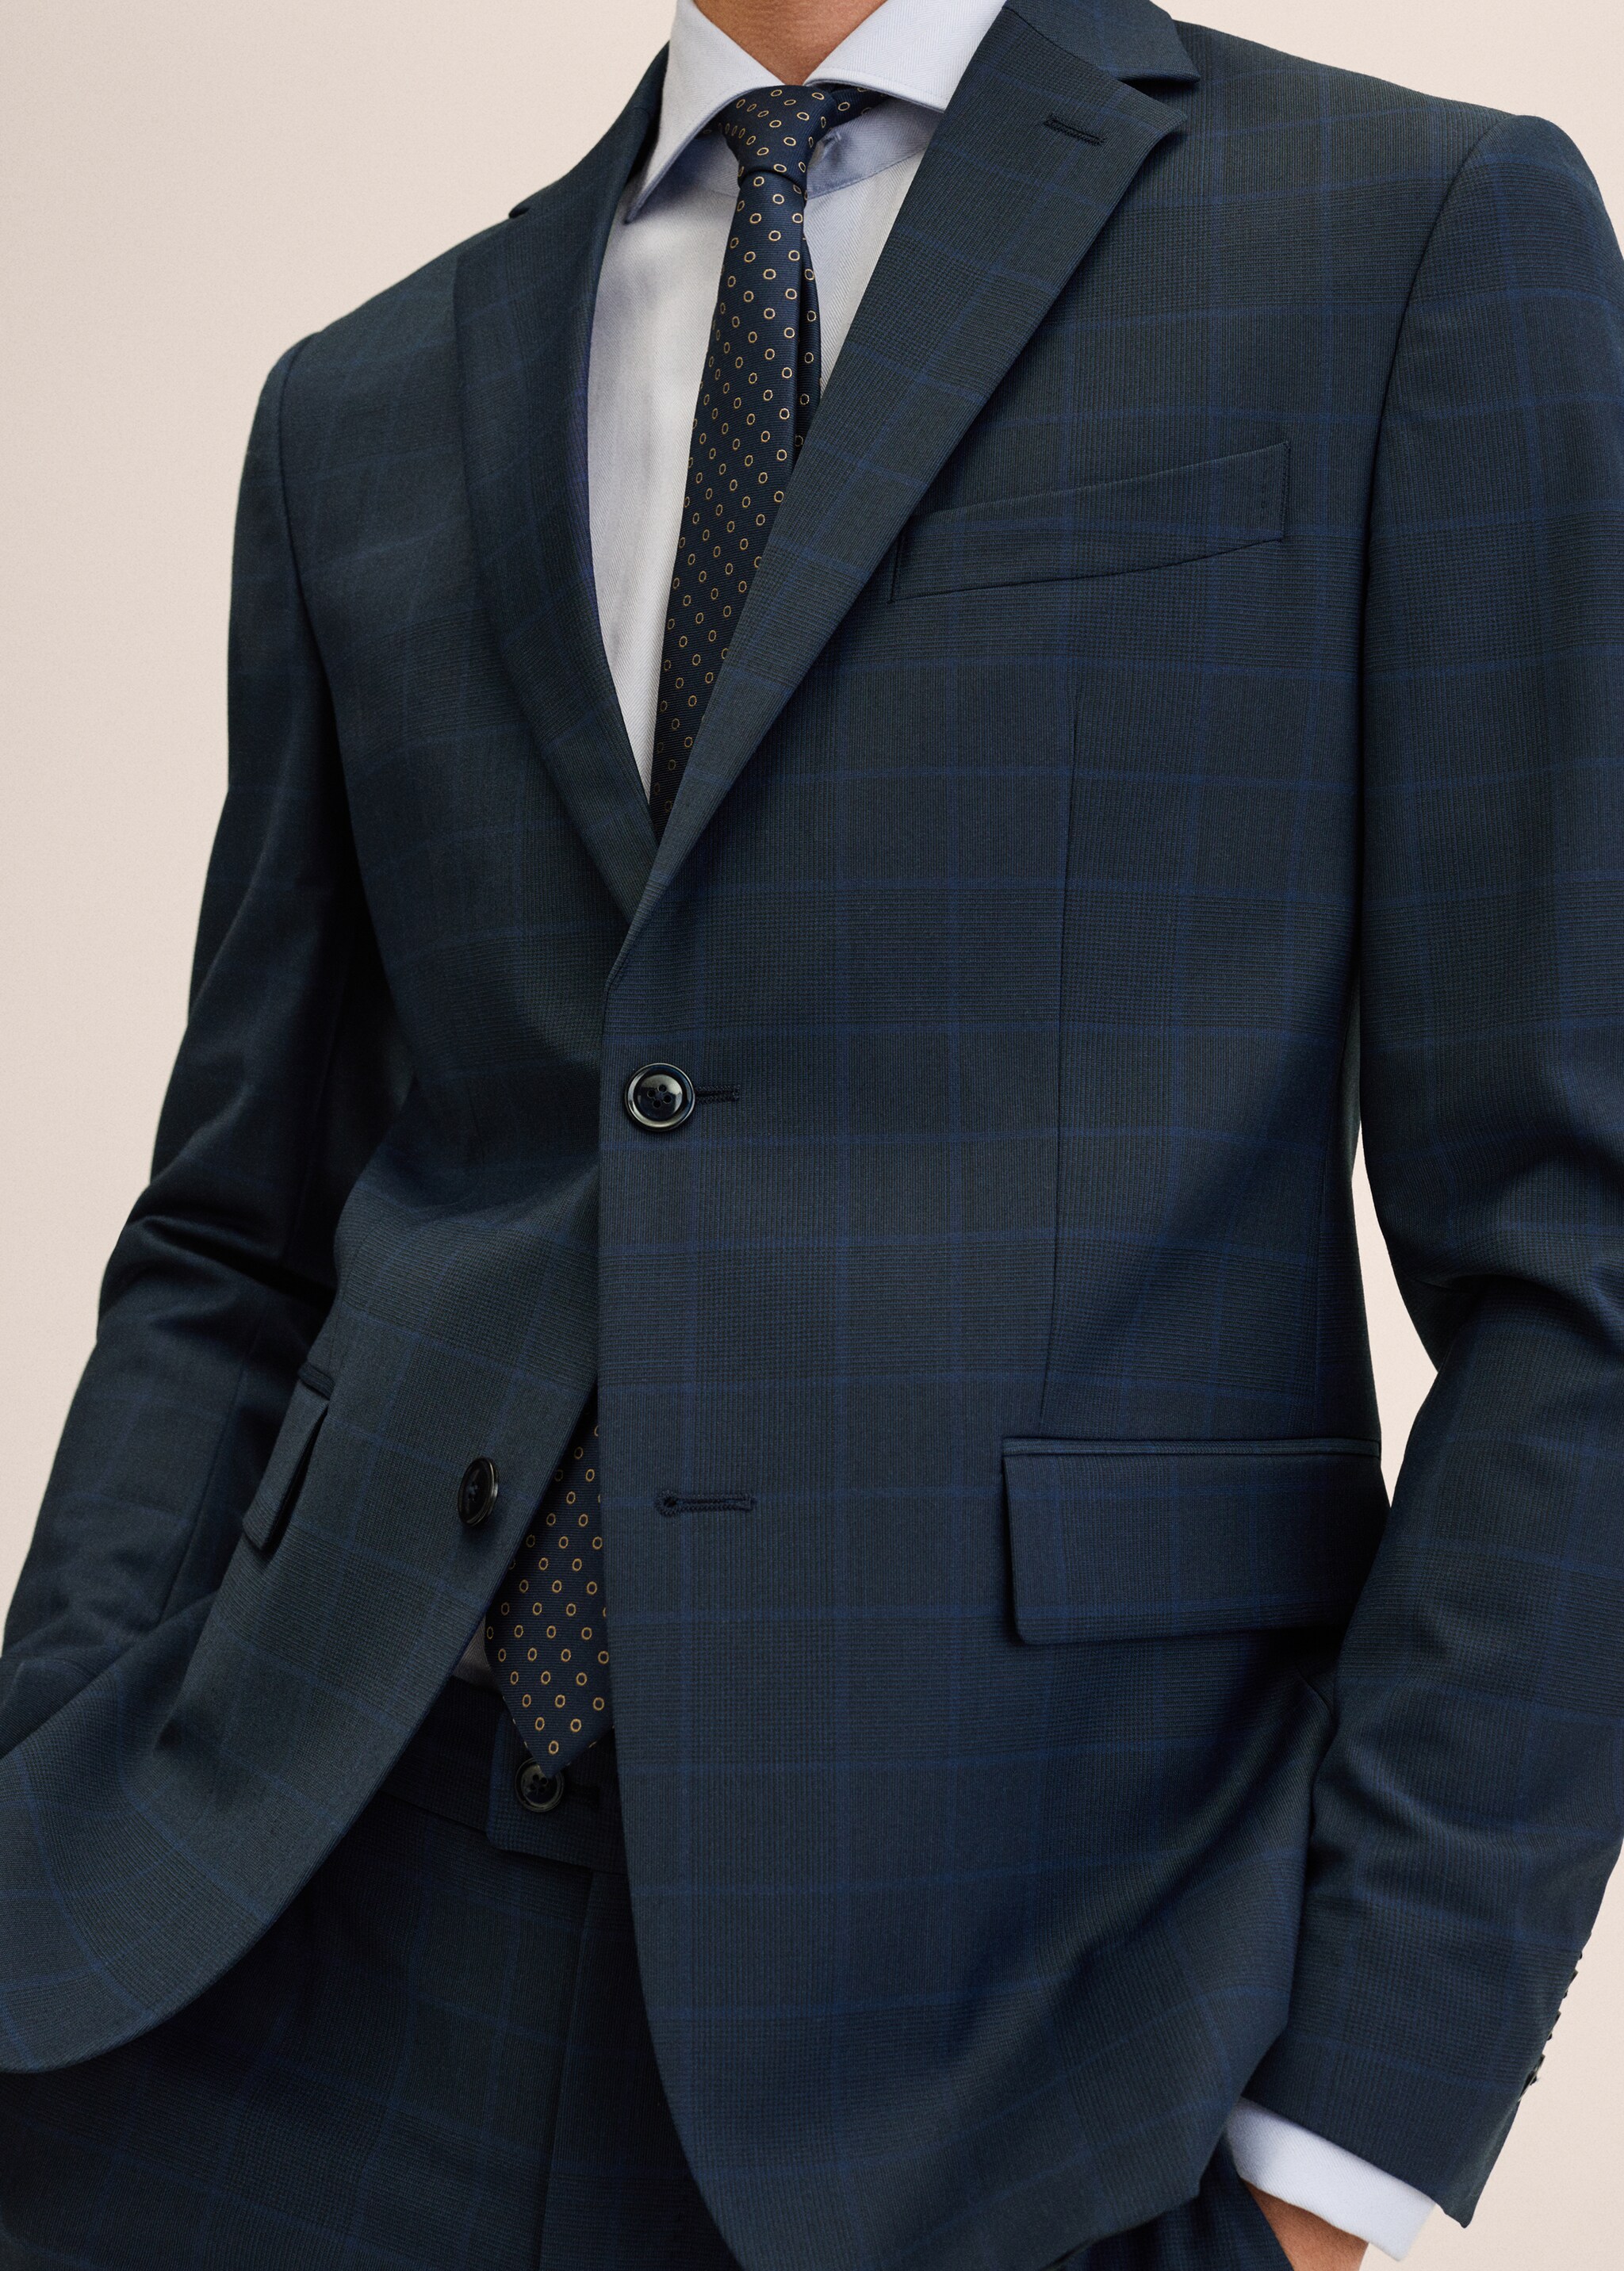 Wool suit jacket - Details of the article 2